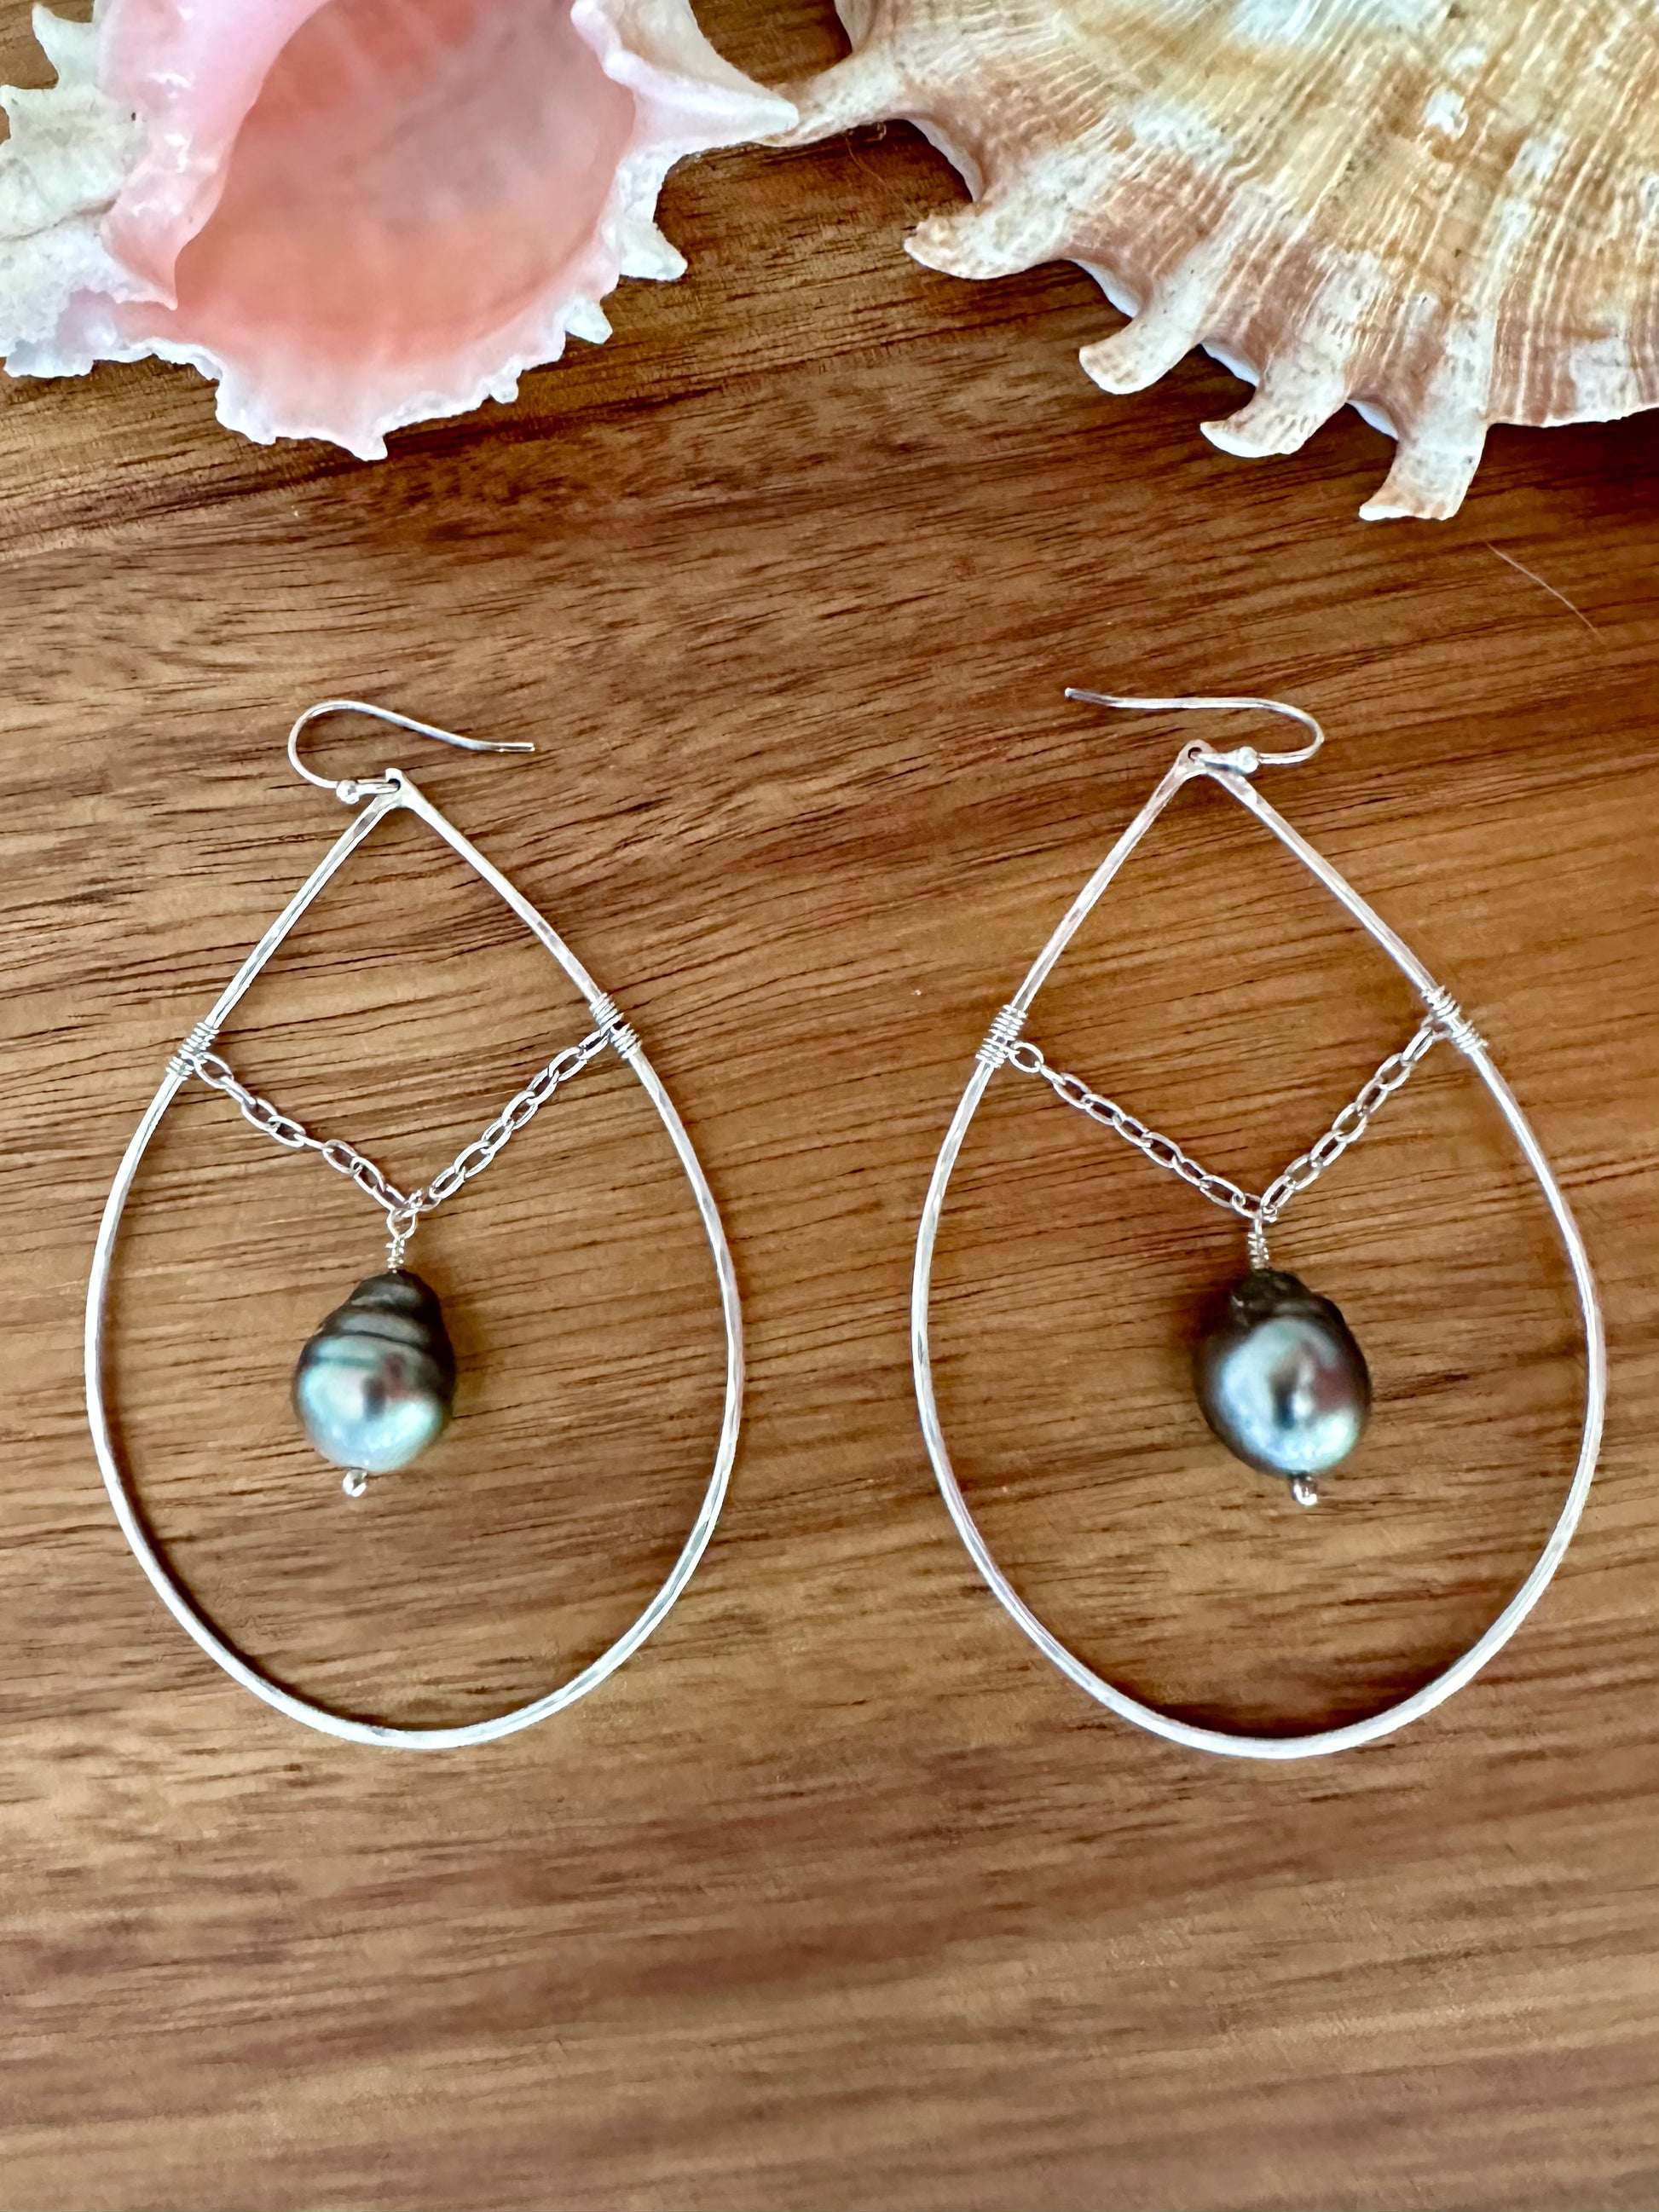 a pair of sterling silver earrings with a chain suspending a black pearl. thye are on a brown wooden background with two shells in the upper part of the frame